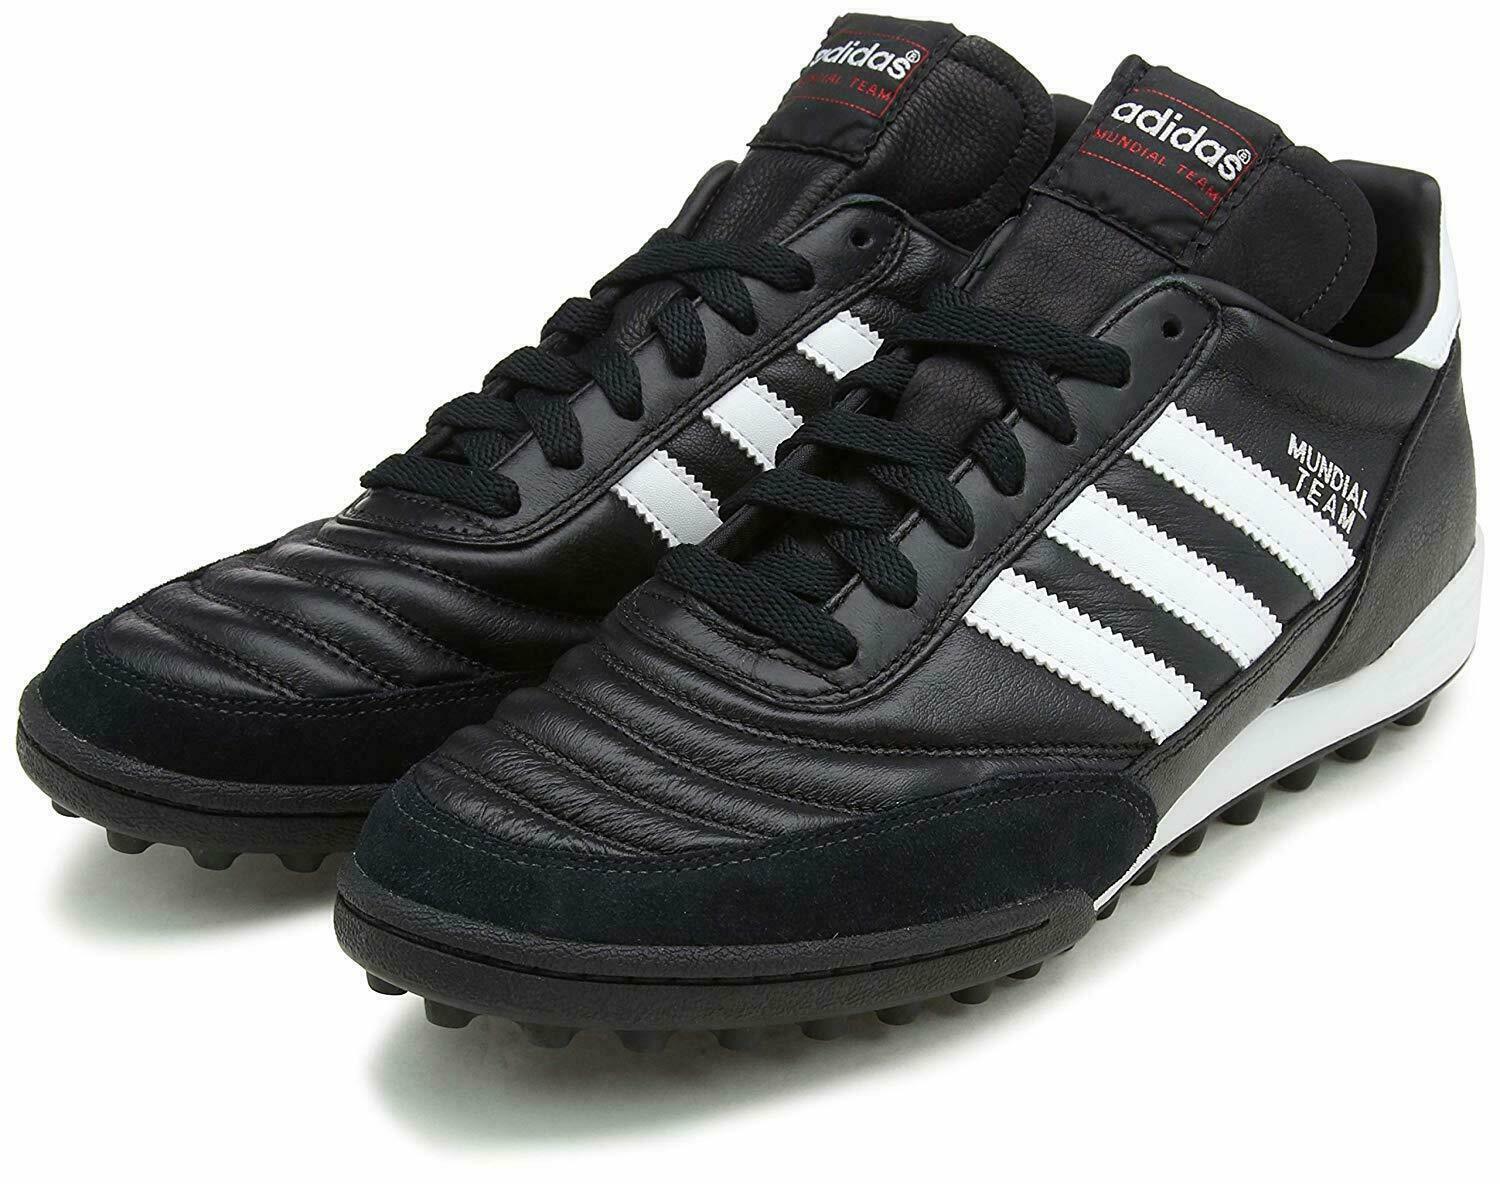 Mundial Team 019228 Black Leather Turf TF Soccer Shoes NEW